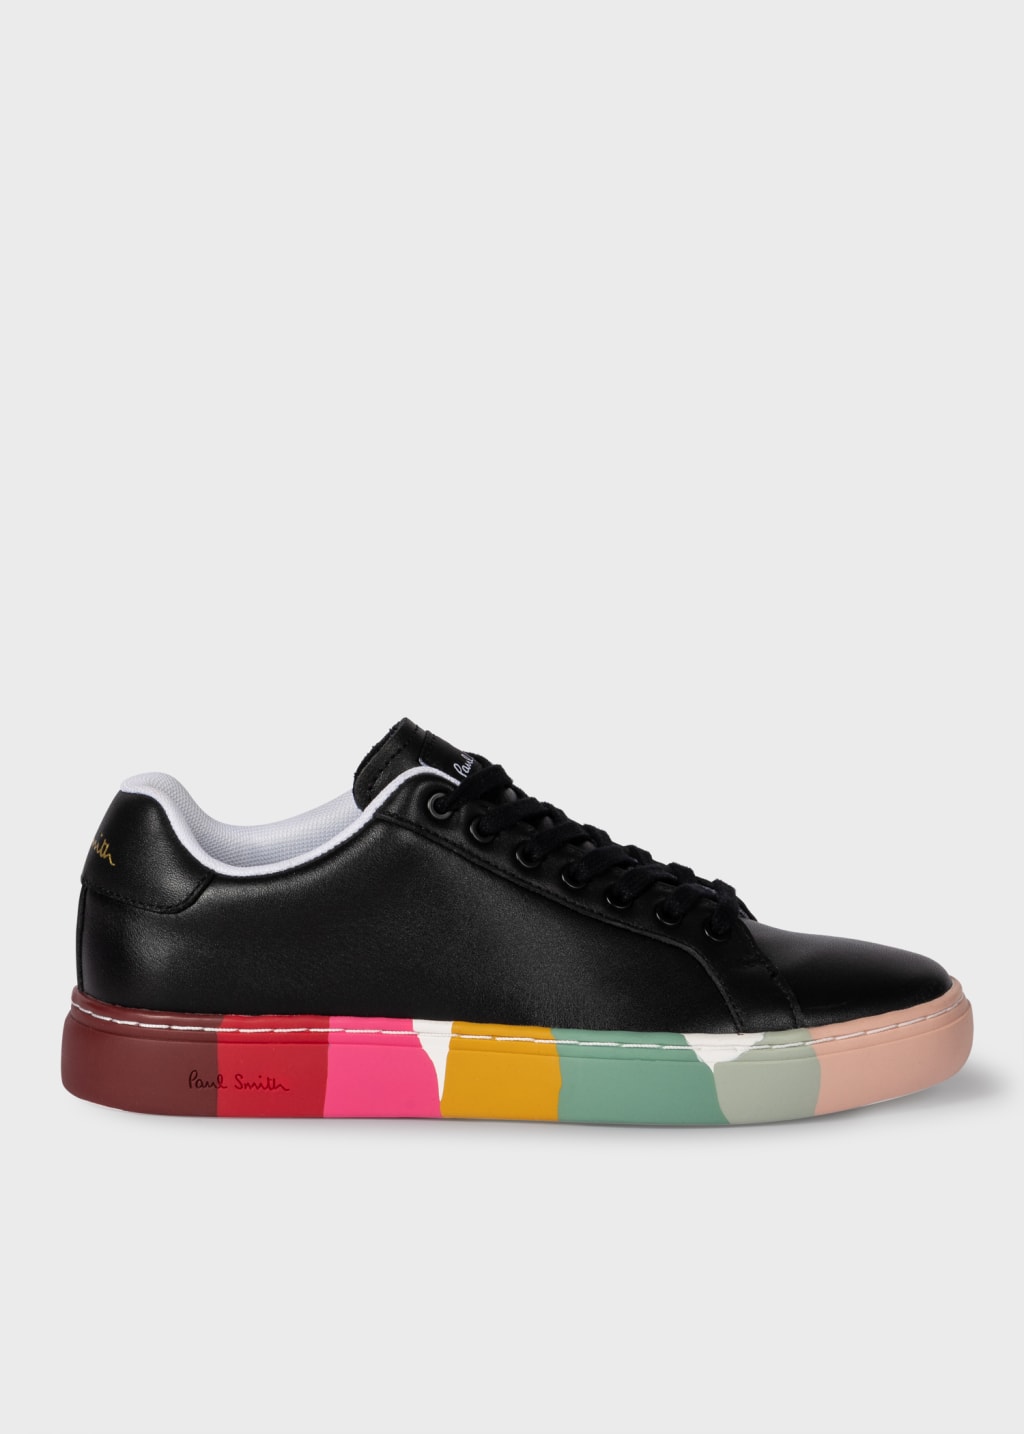 Product View - Women's Black Leather 'Lapin' Swirl Trainers by Paul Smith